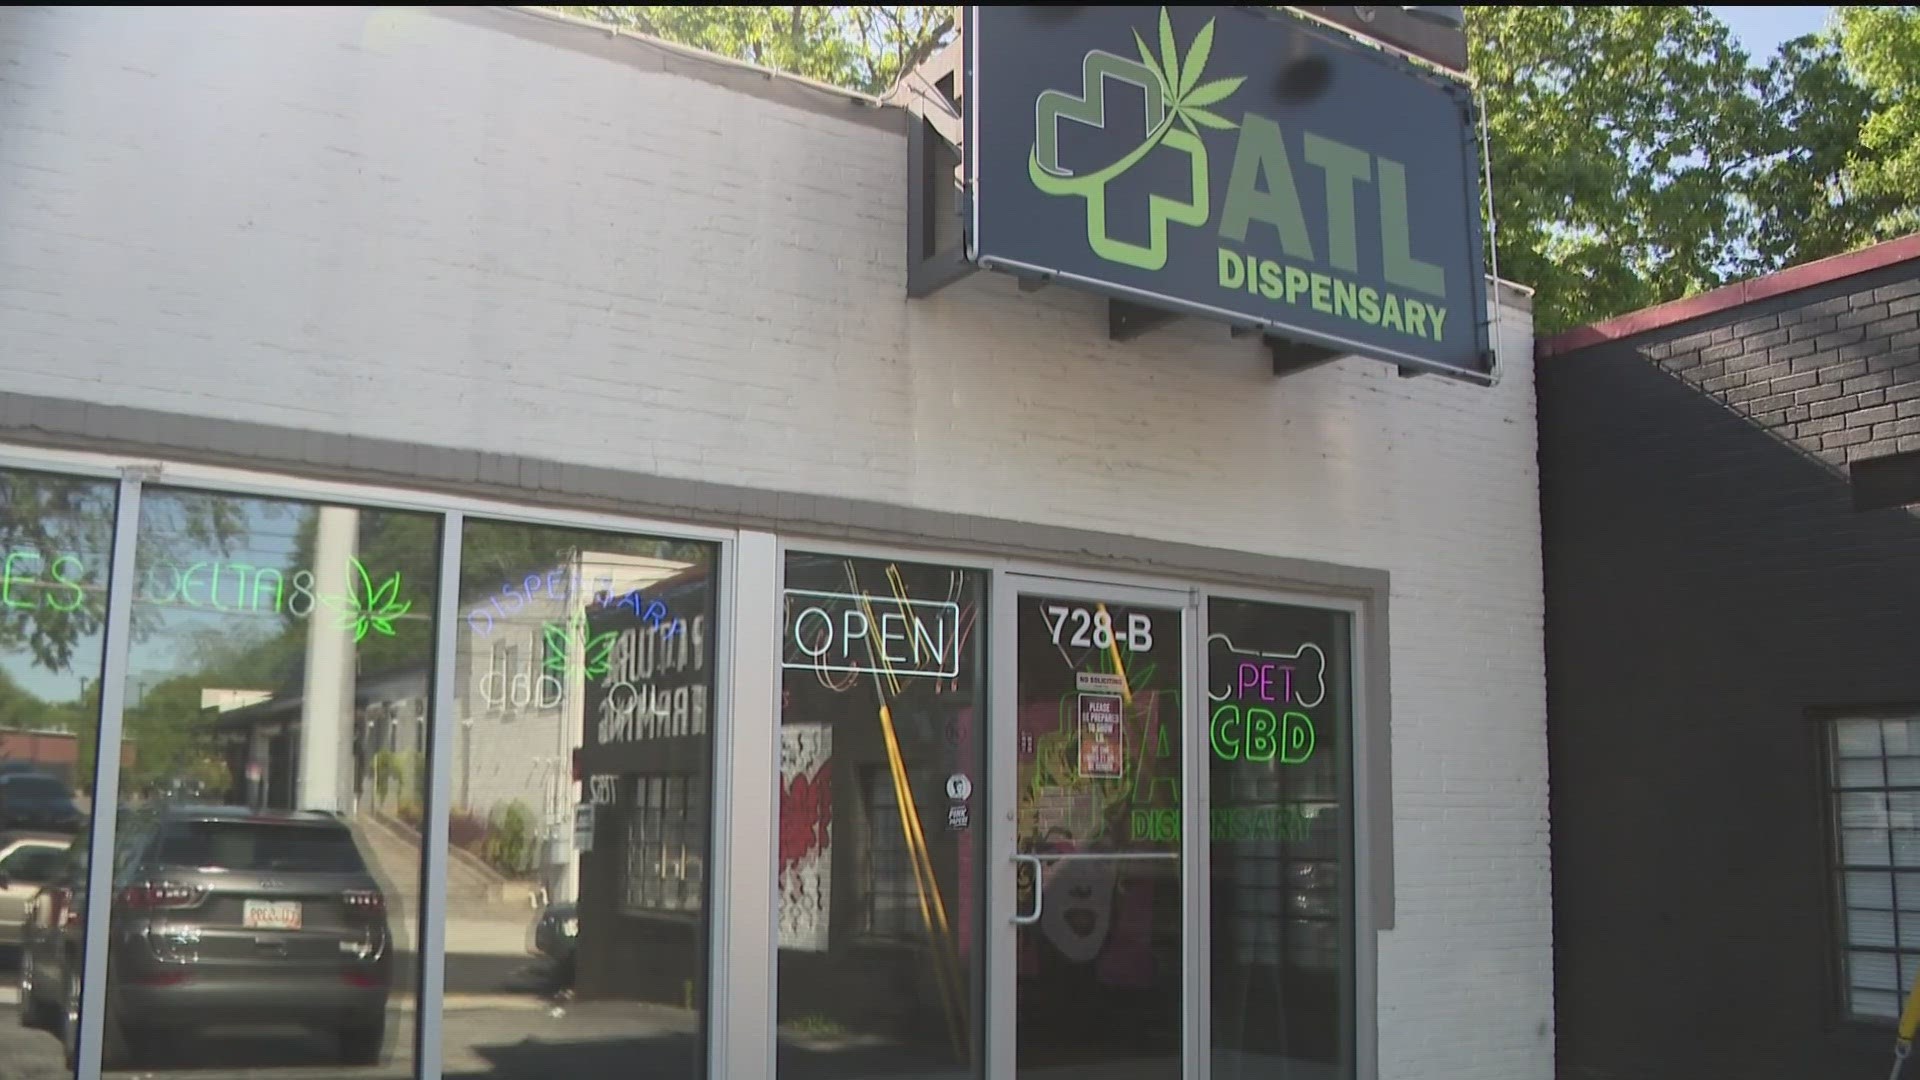 According to previous 11Alive reporting, the number of registered medical marijuana patients directly impacts the number of dispensaries than can open.